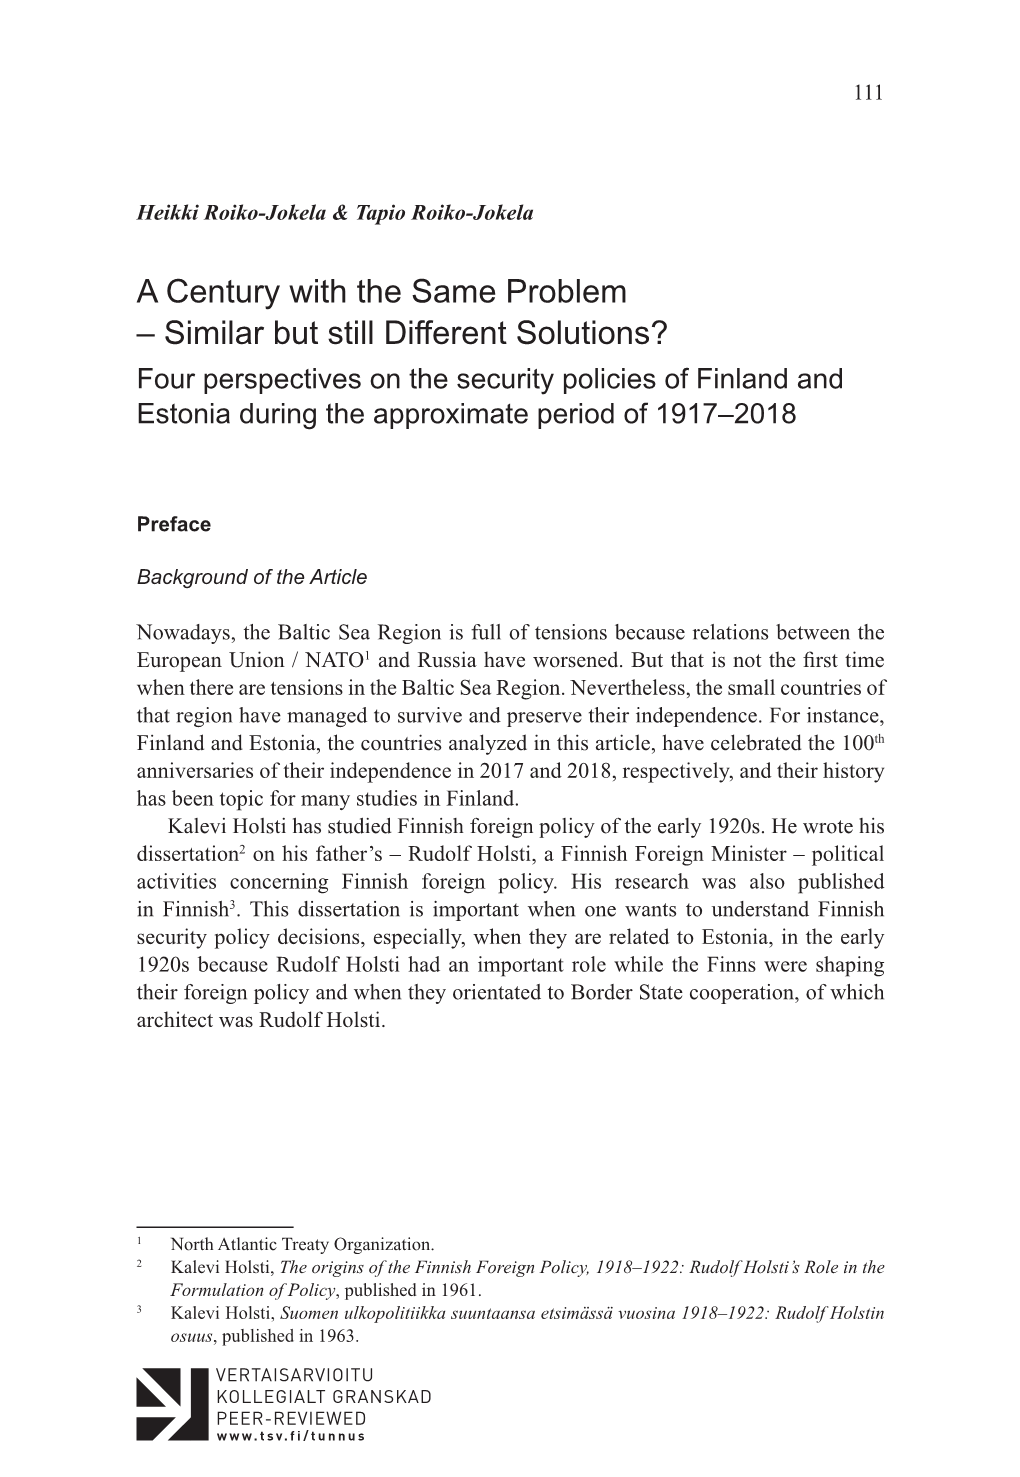 A Century with the Same Problem – Similar but Still Different Solutions?